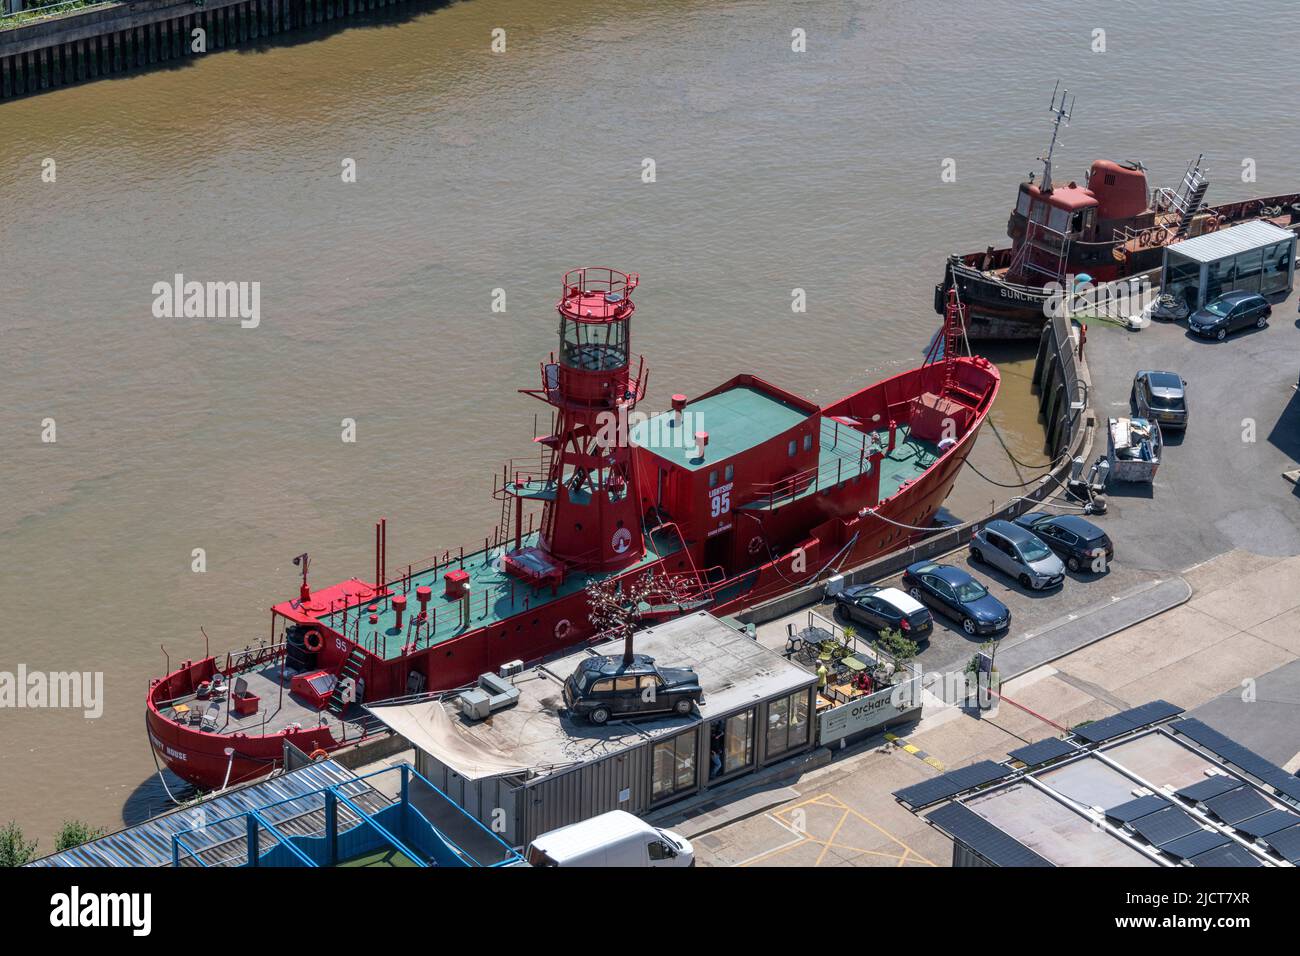 Aerial View of the Lightship and Tug Boat at Trinity Buoy Wharf, London E14. Stock Photo